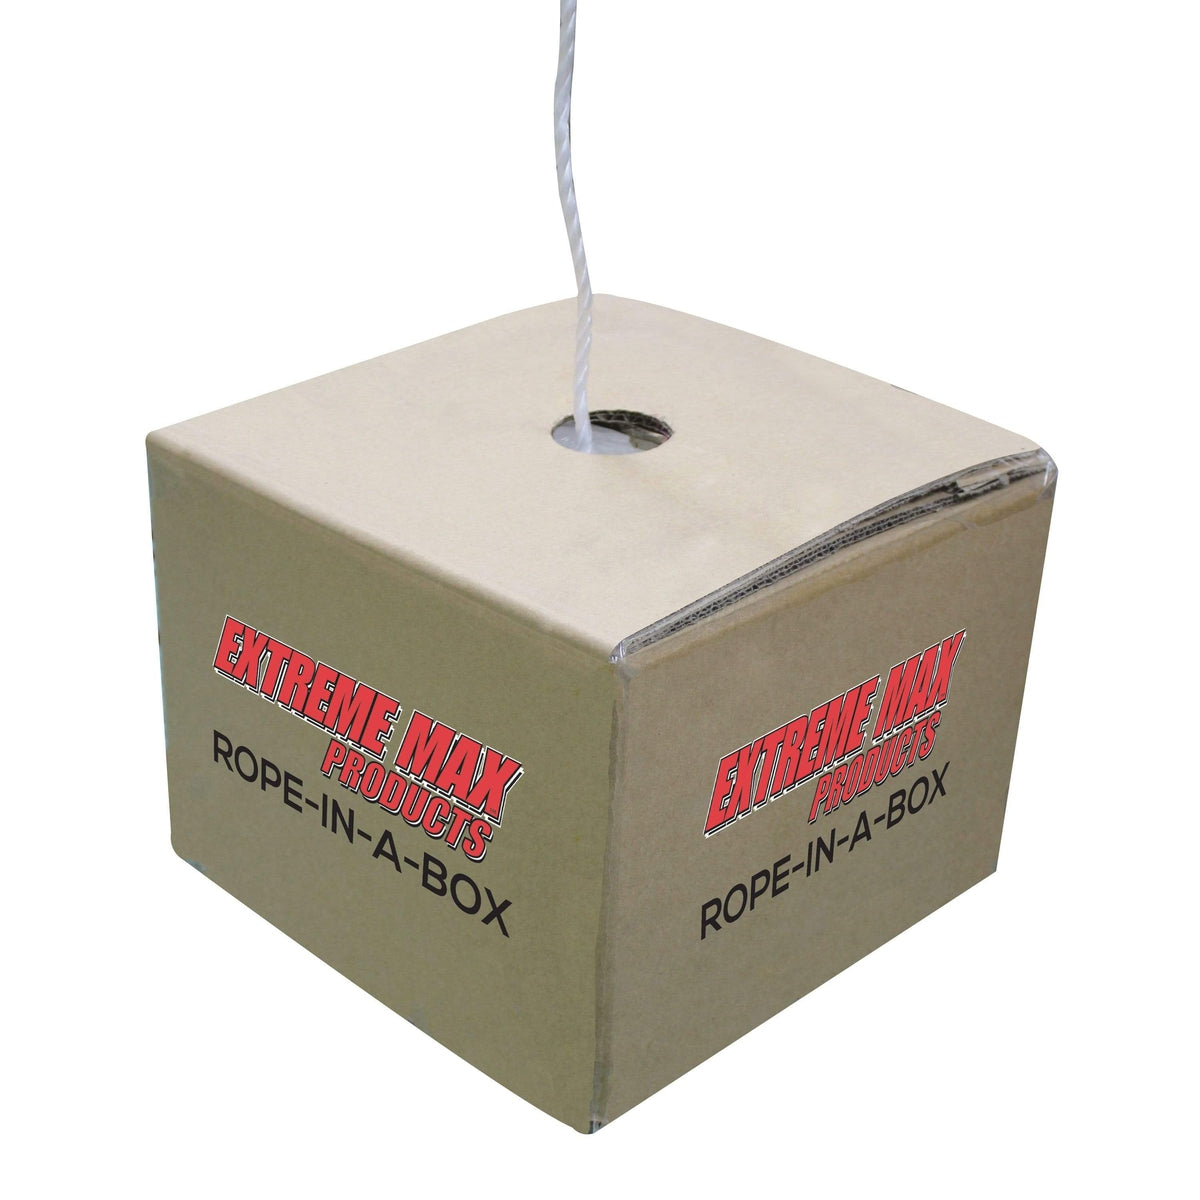 Extreme Max Rope-In-A-Box 7/32" 1500' Bulk Rope #3006.2493